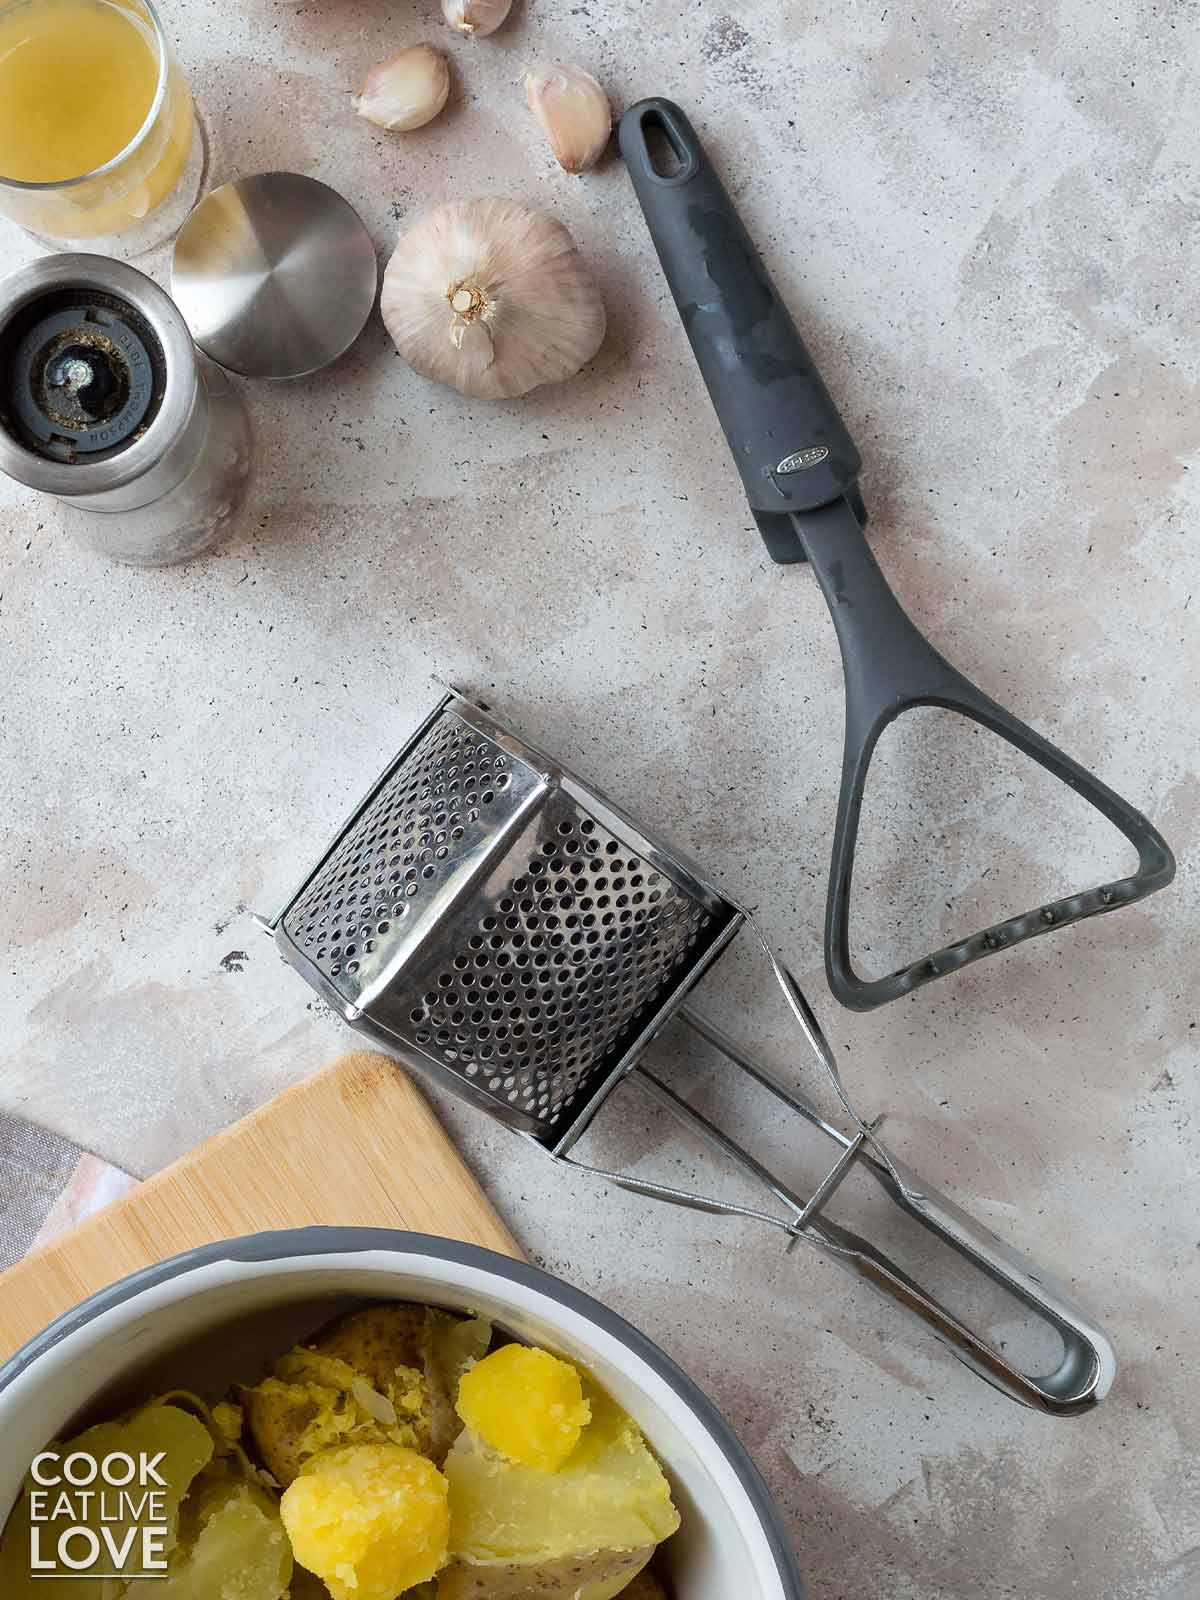 Potato ricer and masher on the table with mashed potato ingredients.